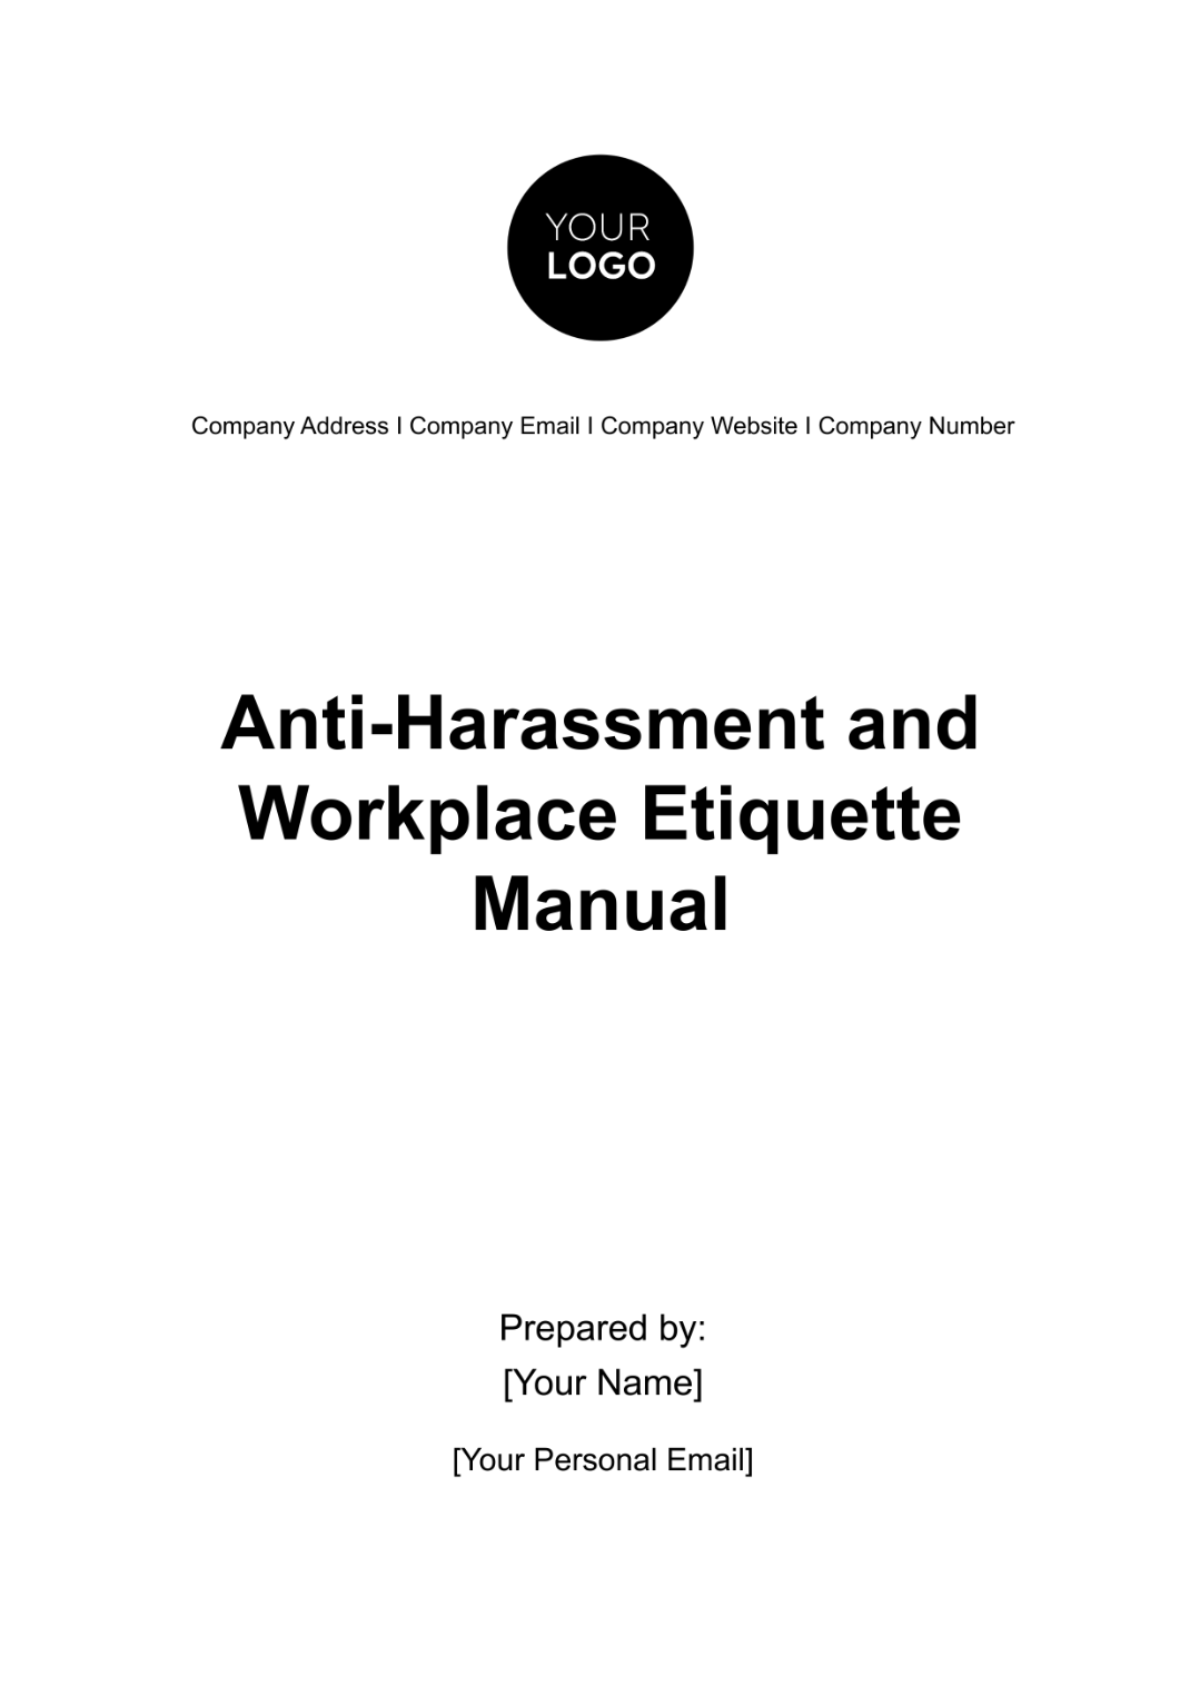 Anti-Harassment and Workplace Etiquette Manual HR Template